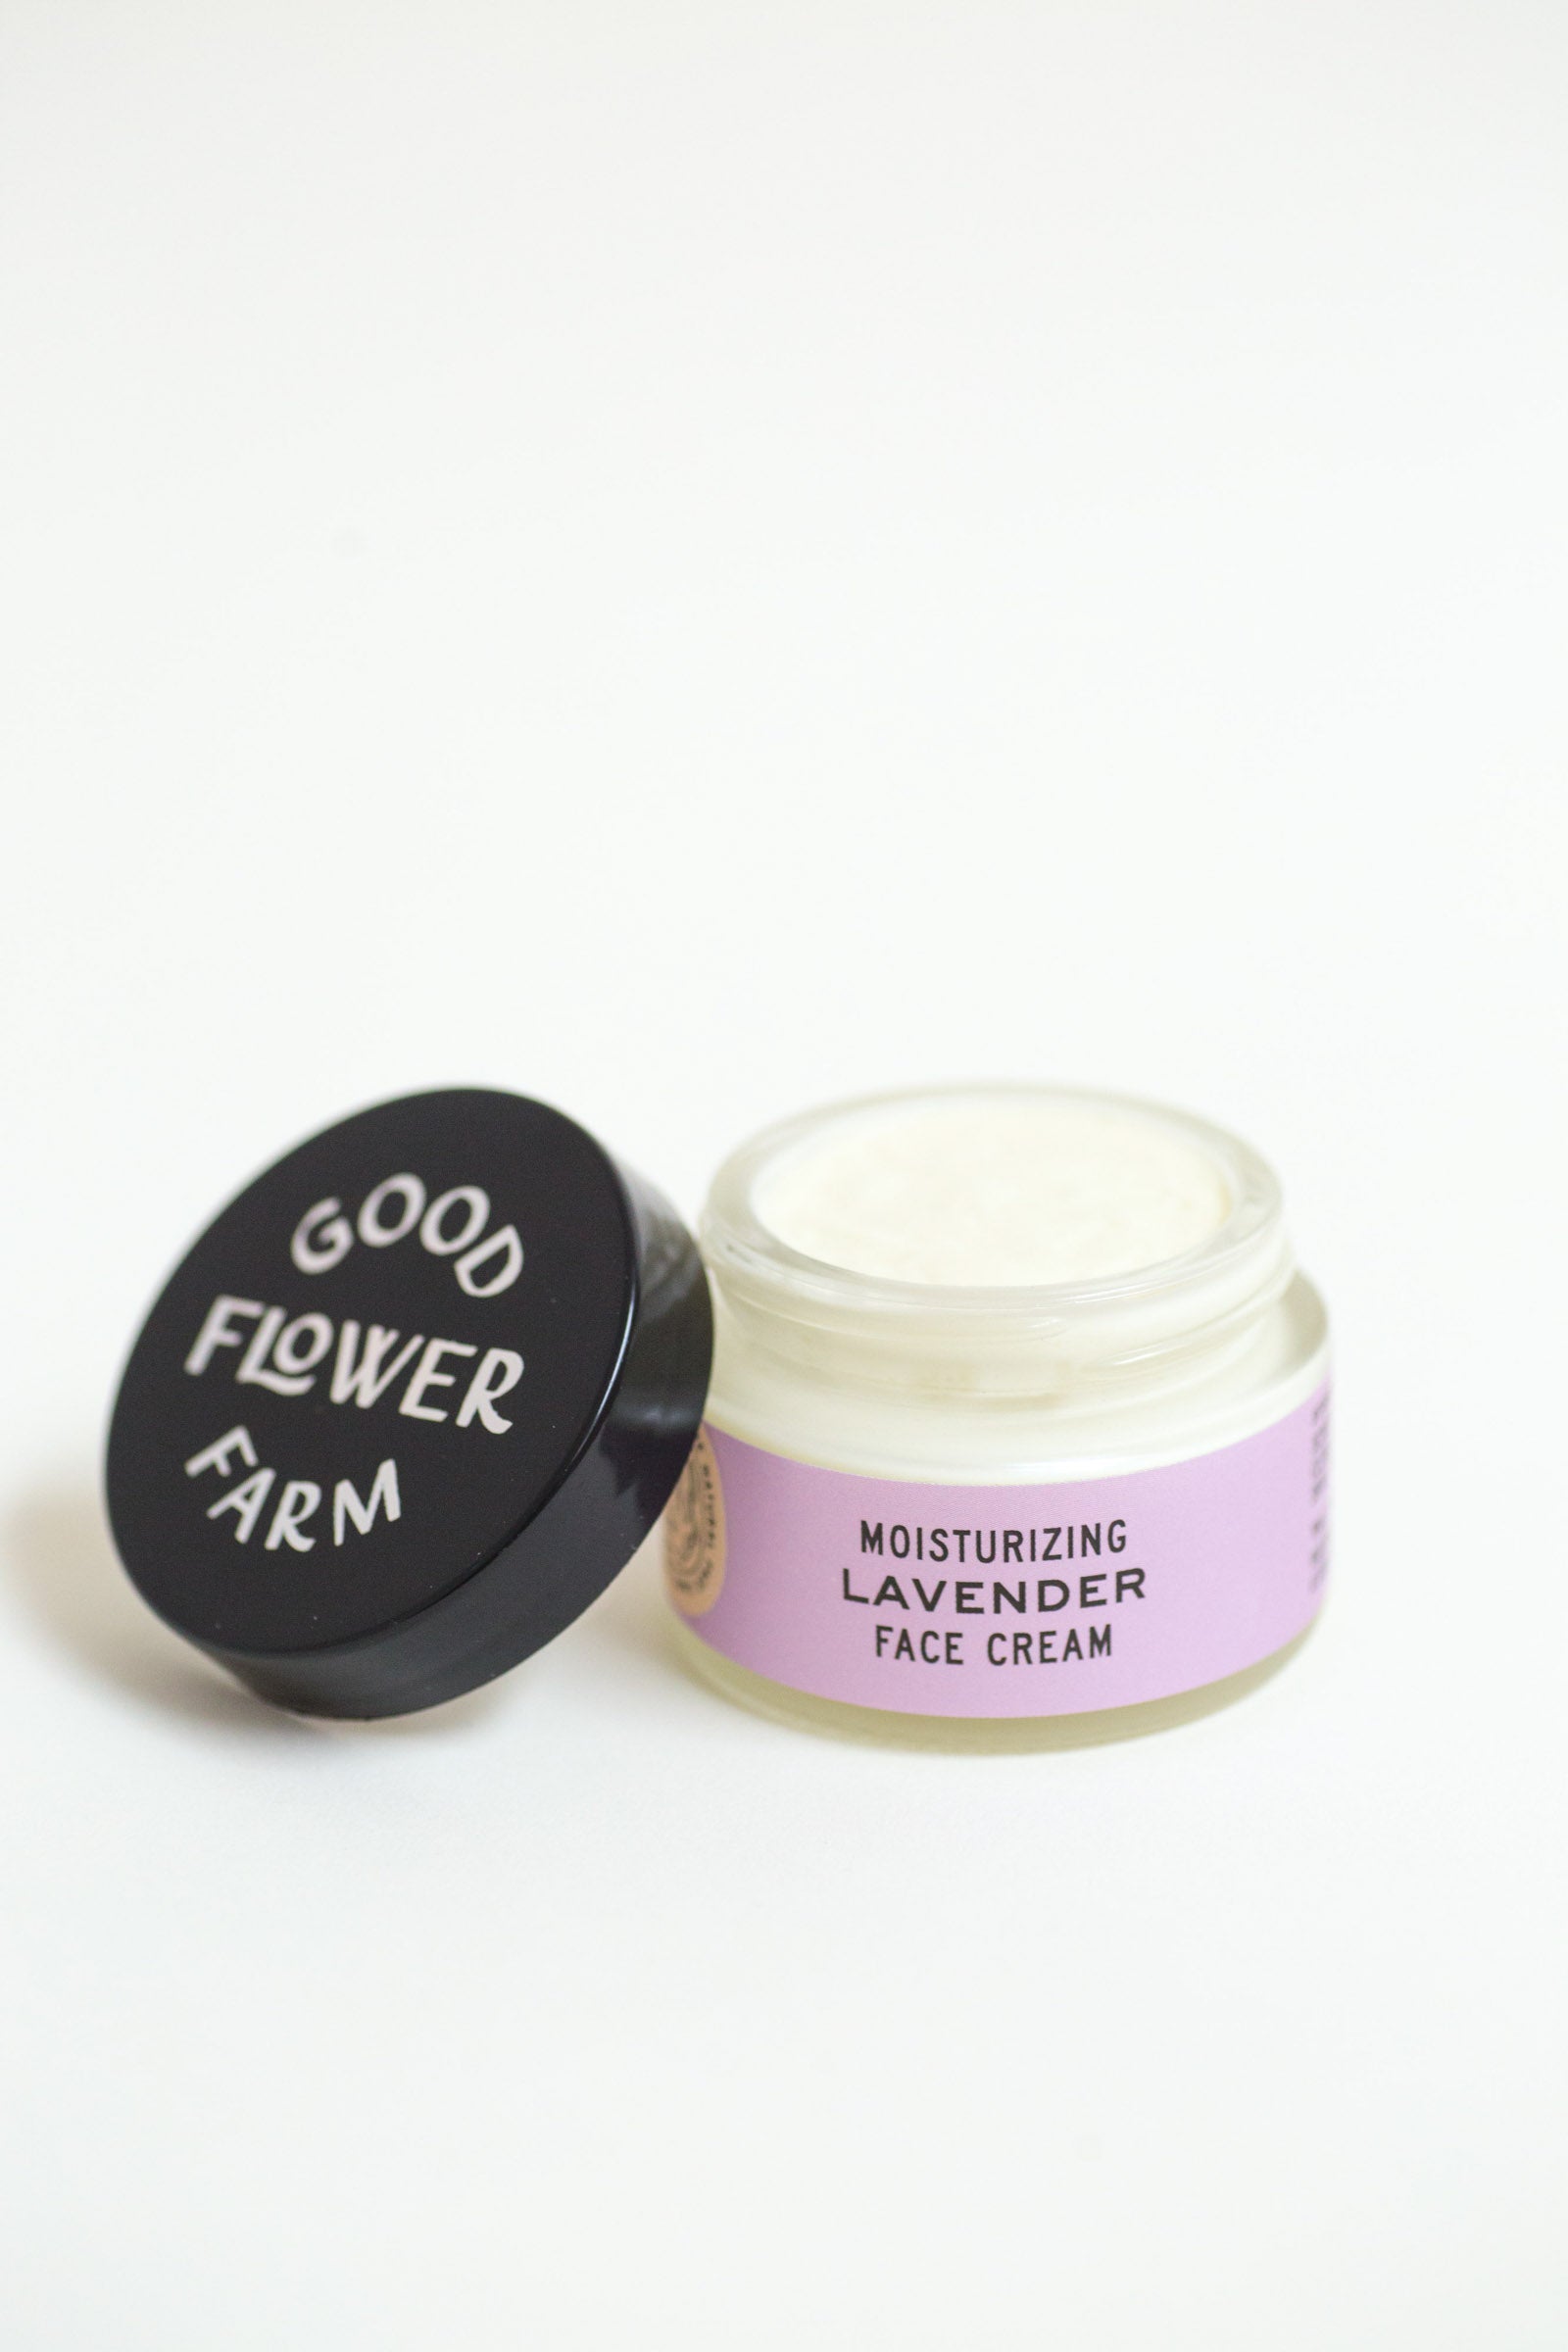 Organic herbal lavender face cream, moisturizing with plant-based oils and butters by Good Flower Farm